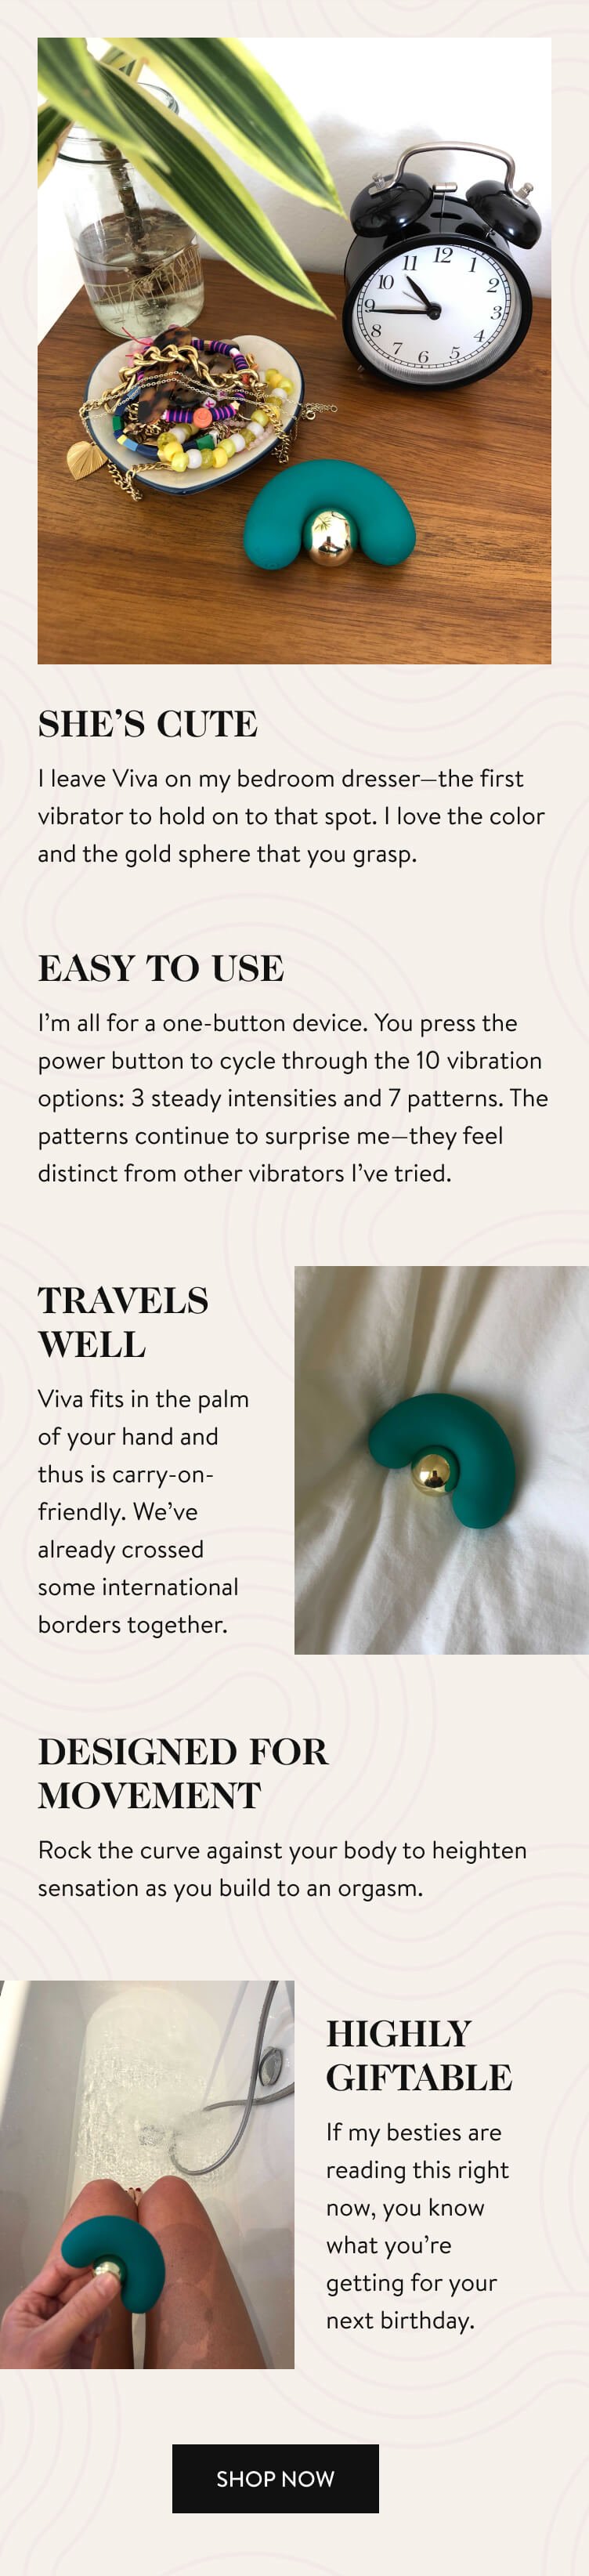 SHE’S CUTE I leave Viva on my bedroom dresser—the first vibrator to hold on to that spot. I love the color and the gold sphere that you grasp. EASY TO USE I’m all for a one-button device. You press the power button to cycle through the 10 vibration options: 3 steady intensities and 7 patterns. The patterns continue to surprise me—they feel distinct from other vibrators I’ve tried. TRAVELS WELL Viva fits in the palm of your hand and thus is carry-on-friendly. We’ve already crossed some international borders together. DESIGNED FOR MOVEMENT Rock the curve against your body to heighten sensation as you build to an orgasm. HIGHLY GIFTABLE If my besties are reading this right now, you know what you’re getting for your next birthday. Shop Now